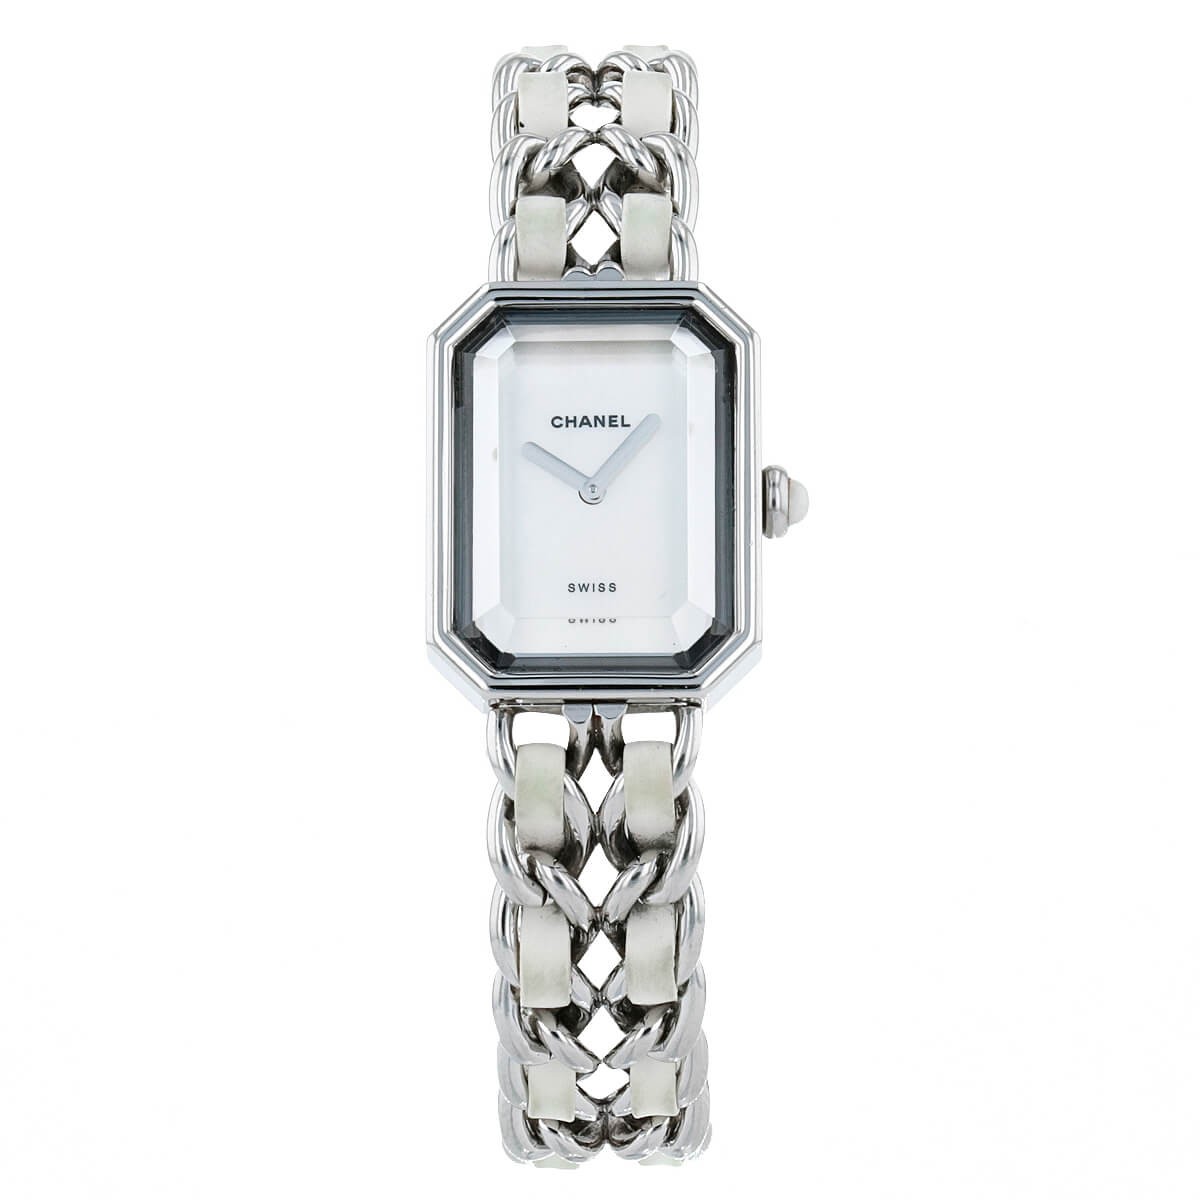 Chanel H7022 Premiere Iconic Chain Watch 261 x 20 x 76 mm